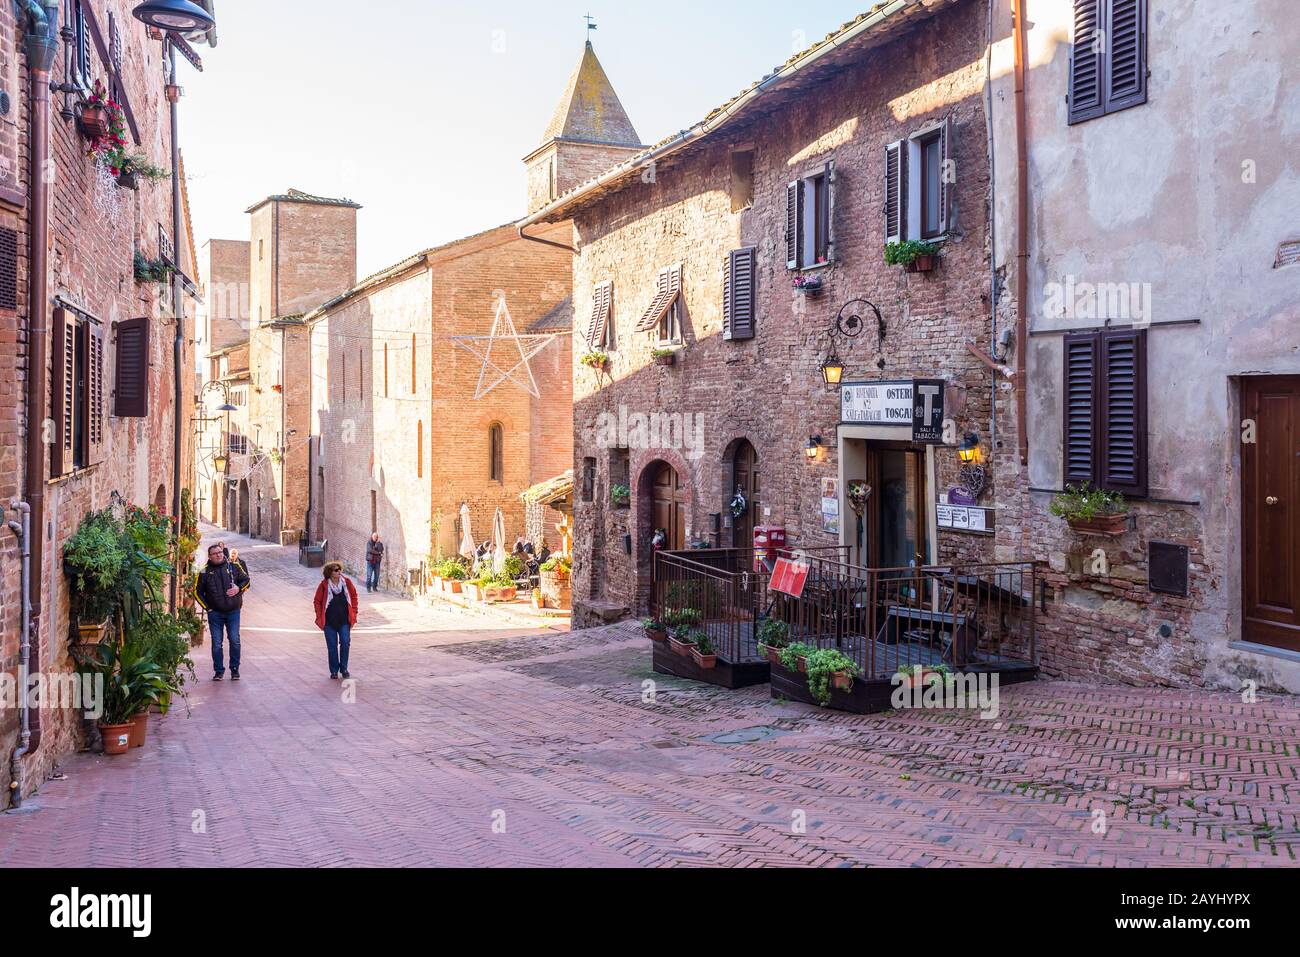 Certaldo, Tuscany, Italy - December 2019: View of the main cobbled street in the medieval town of Certaldo, Tuscany, Italy Stock Photo